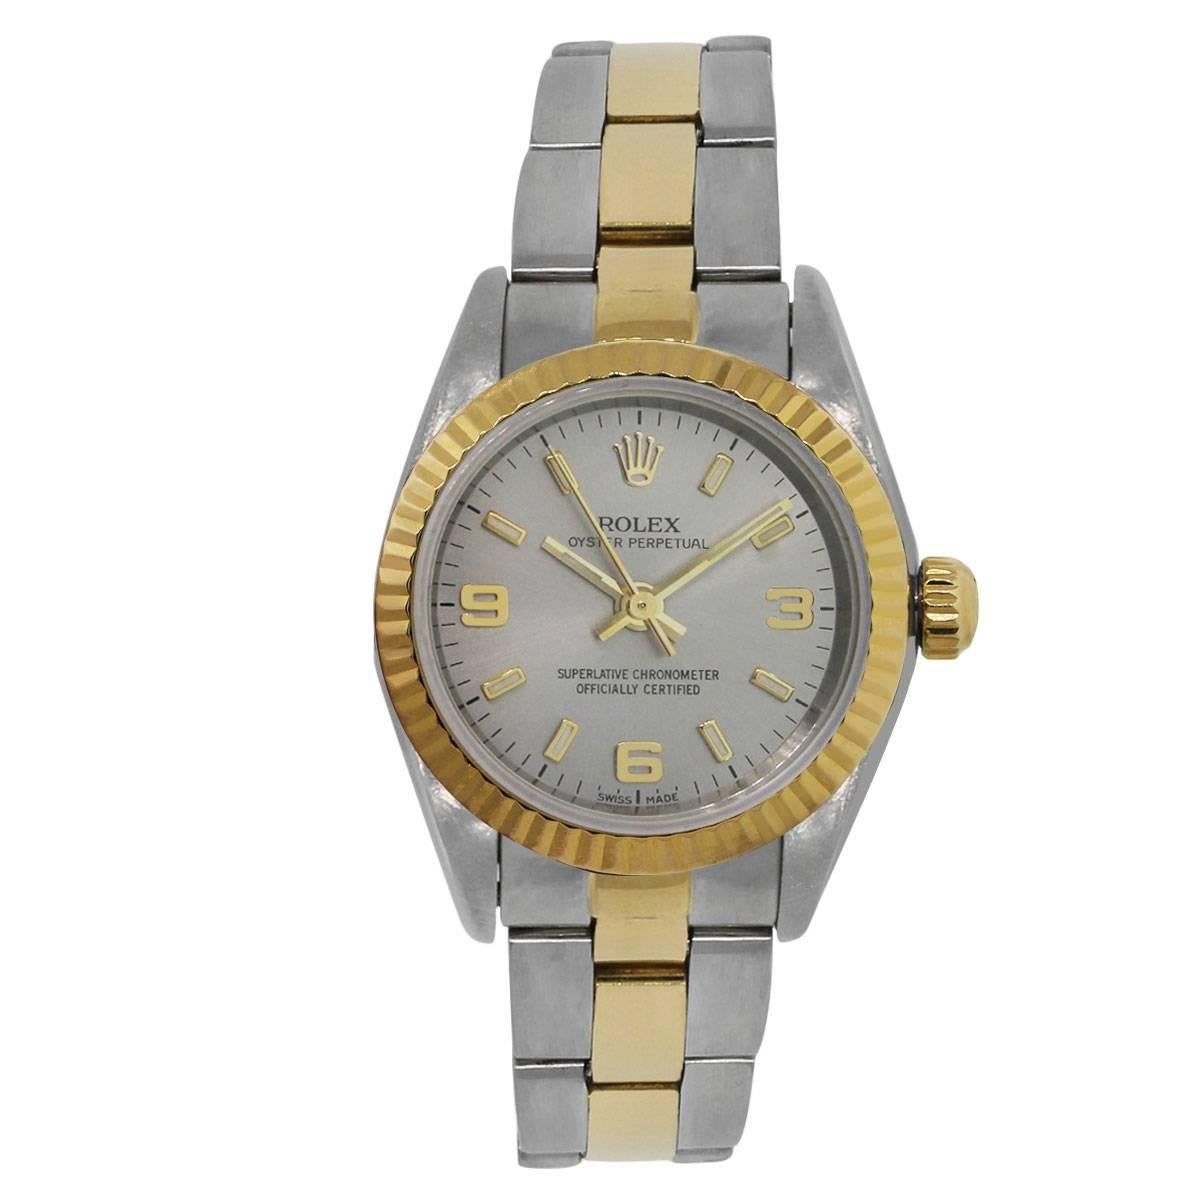 Brand: Rolex
MPN: 76193
Model: Oyster perpetual non-date
Case Material: Stainless & 18k
Case Diameter: 24mm
Crystal: Scratch resistant sapphire
Bezel: 18k yellow gold fixed fluted bezel
Dial: Silver dial with yellow gold hour, minute and second